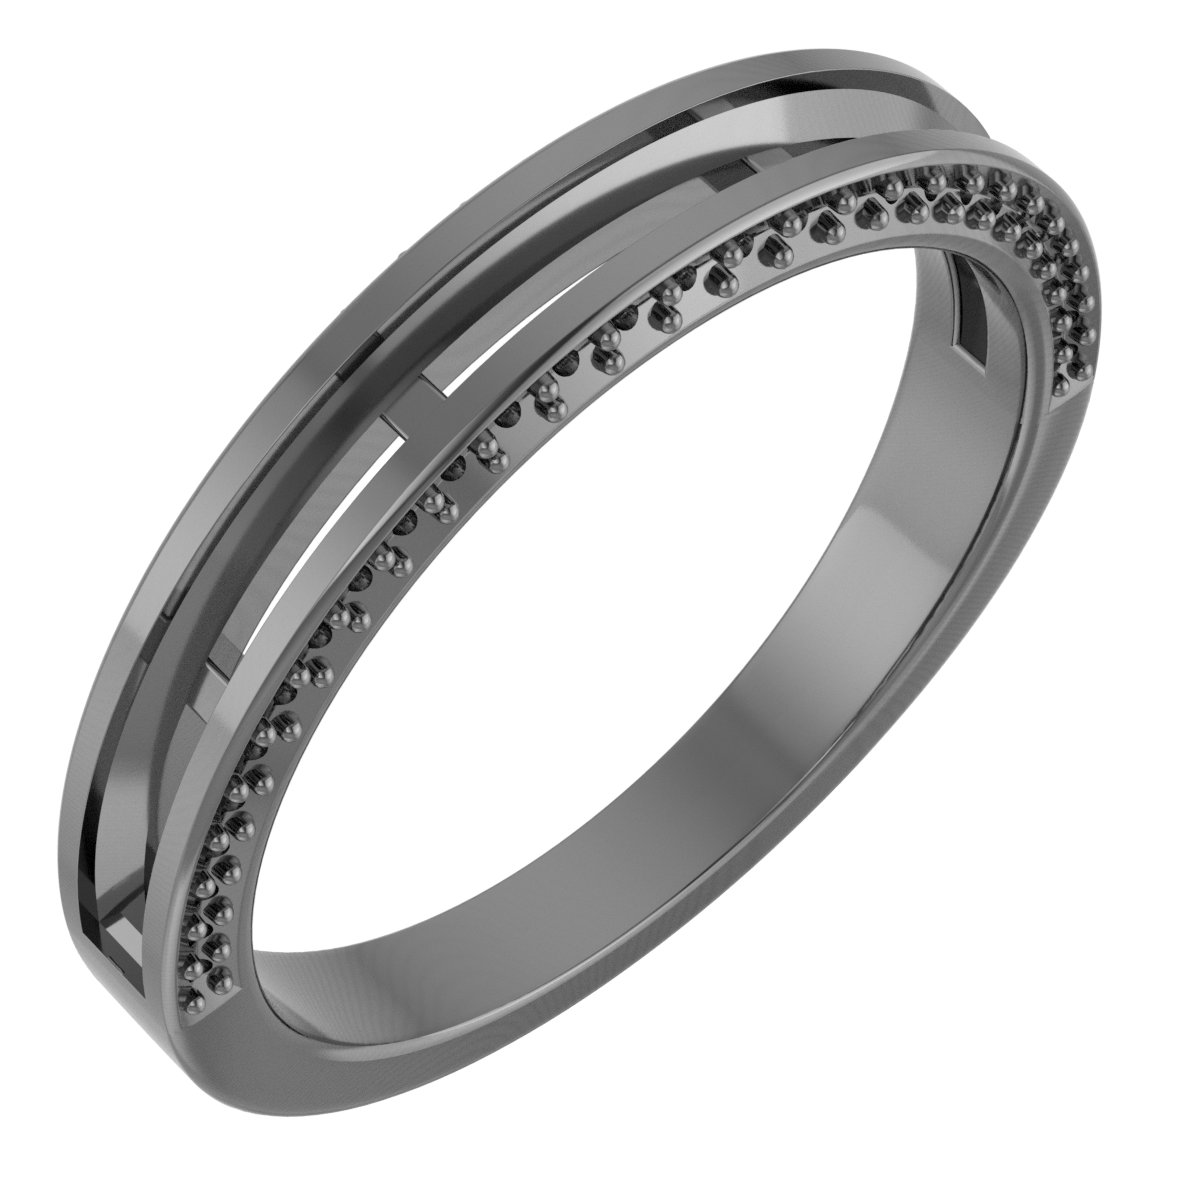 123940 / Neosadený / Sterling Silver / Square / 1.75X1.75 Mm / Poliert / Anniversary Band Mounting